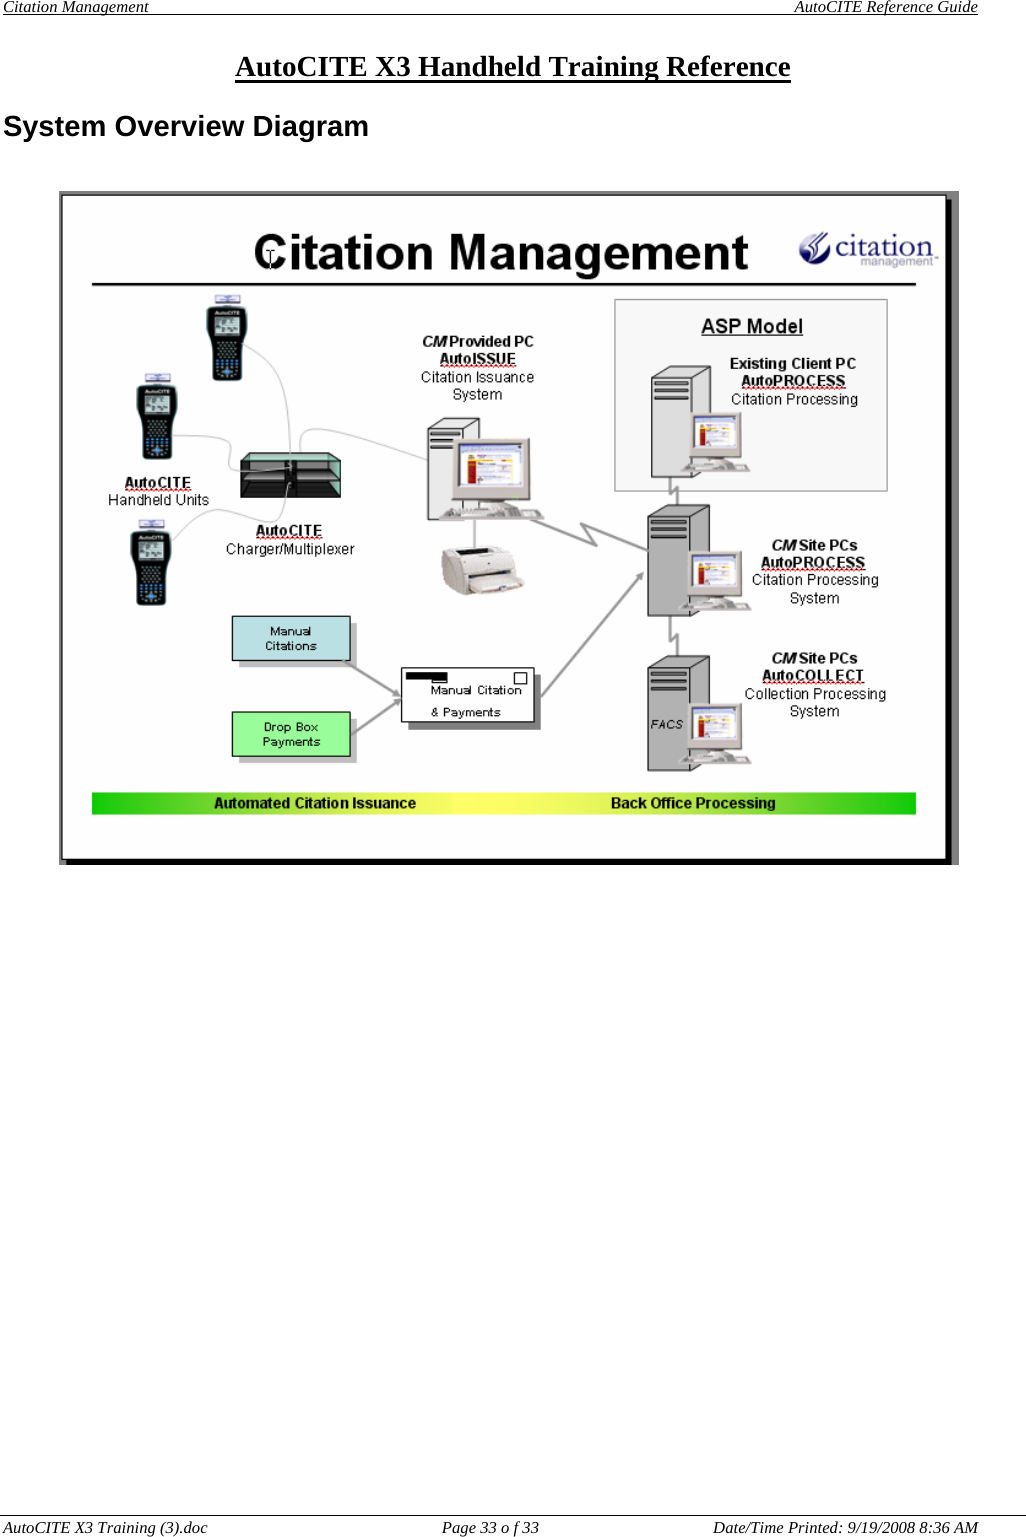 Citation Management    AutoCITE Reference Guide  AutoCITE X3 Handheld Training Reference AutoCITE X3 Training (3).doc  Page 33 o f 33  Date/Time Printed: 9/19/2008 8:36 AMSystem Overview Diagram 